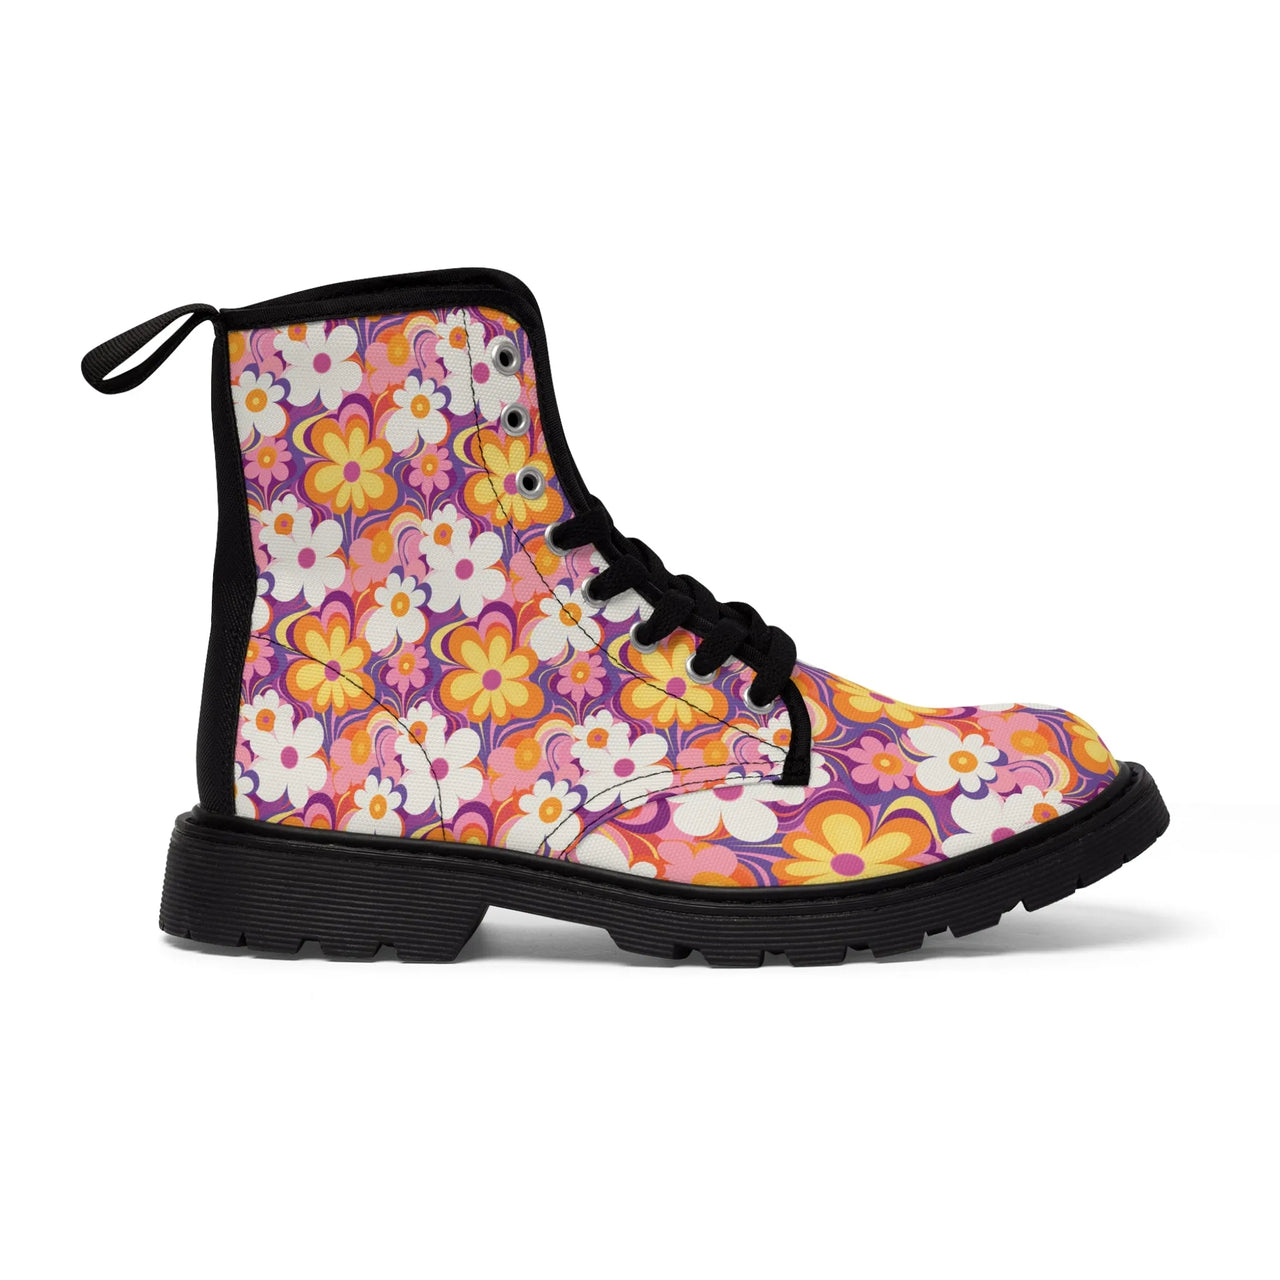 Groovy Garden Stroll: Retro '60s Inspired Floral Black Boots